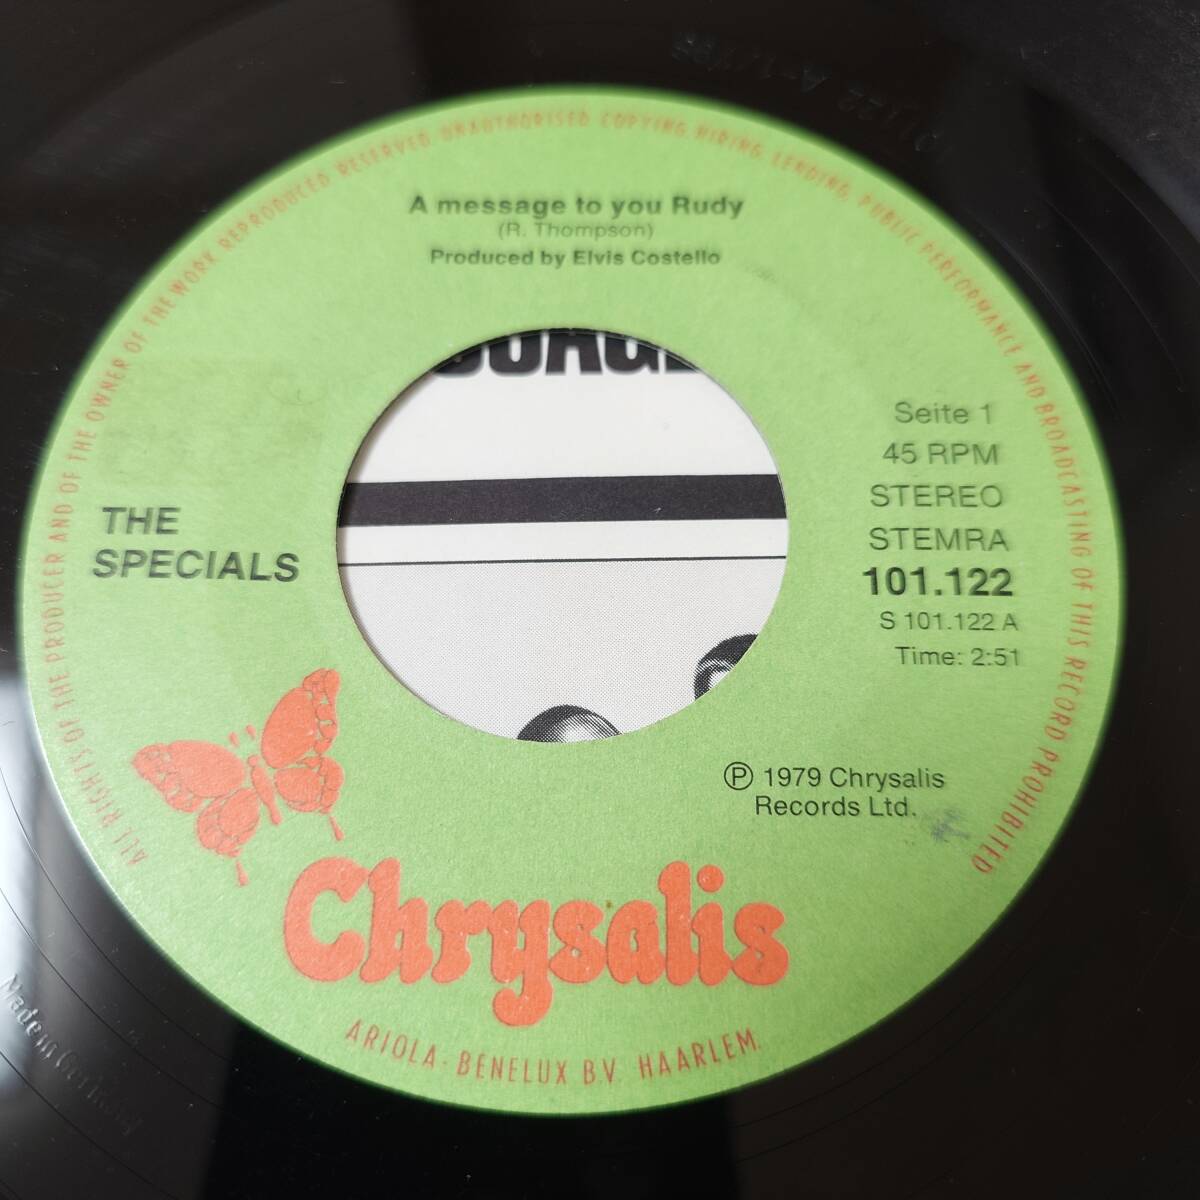 The Specials & Rico Rodriguez - A Message To You Rudy / Nite Klub / Chrysalis 7inch / Skaの画像3